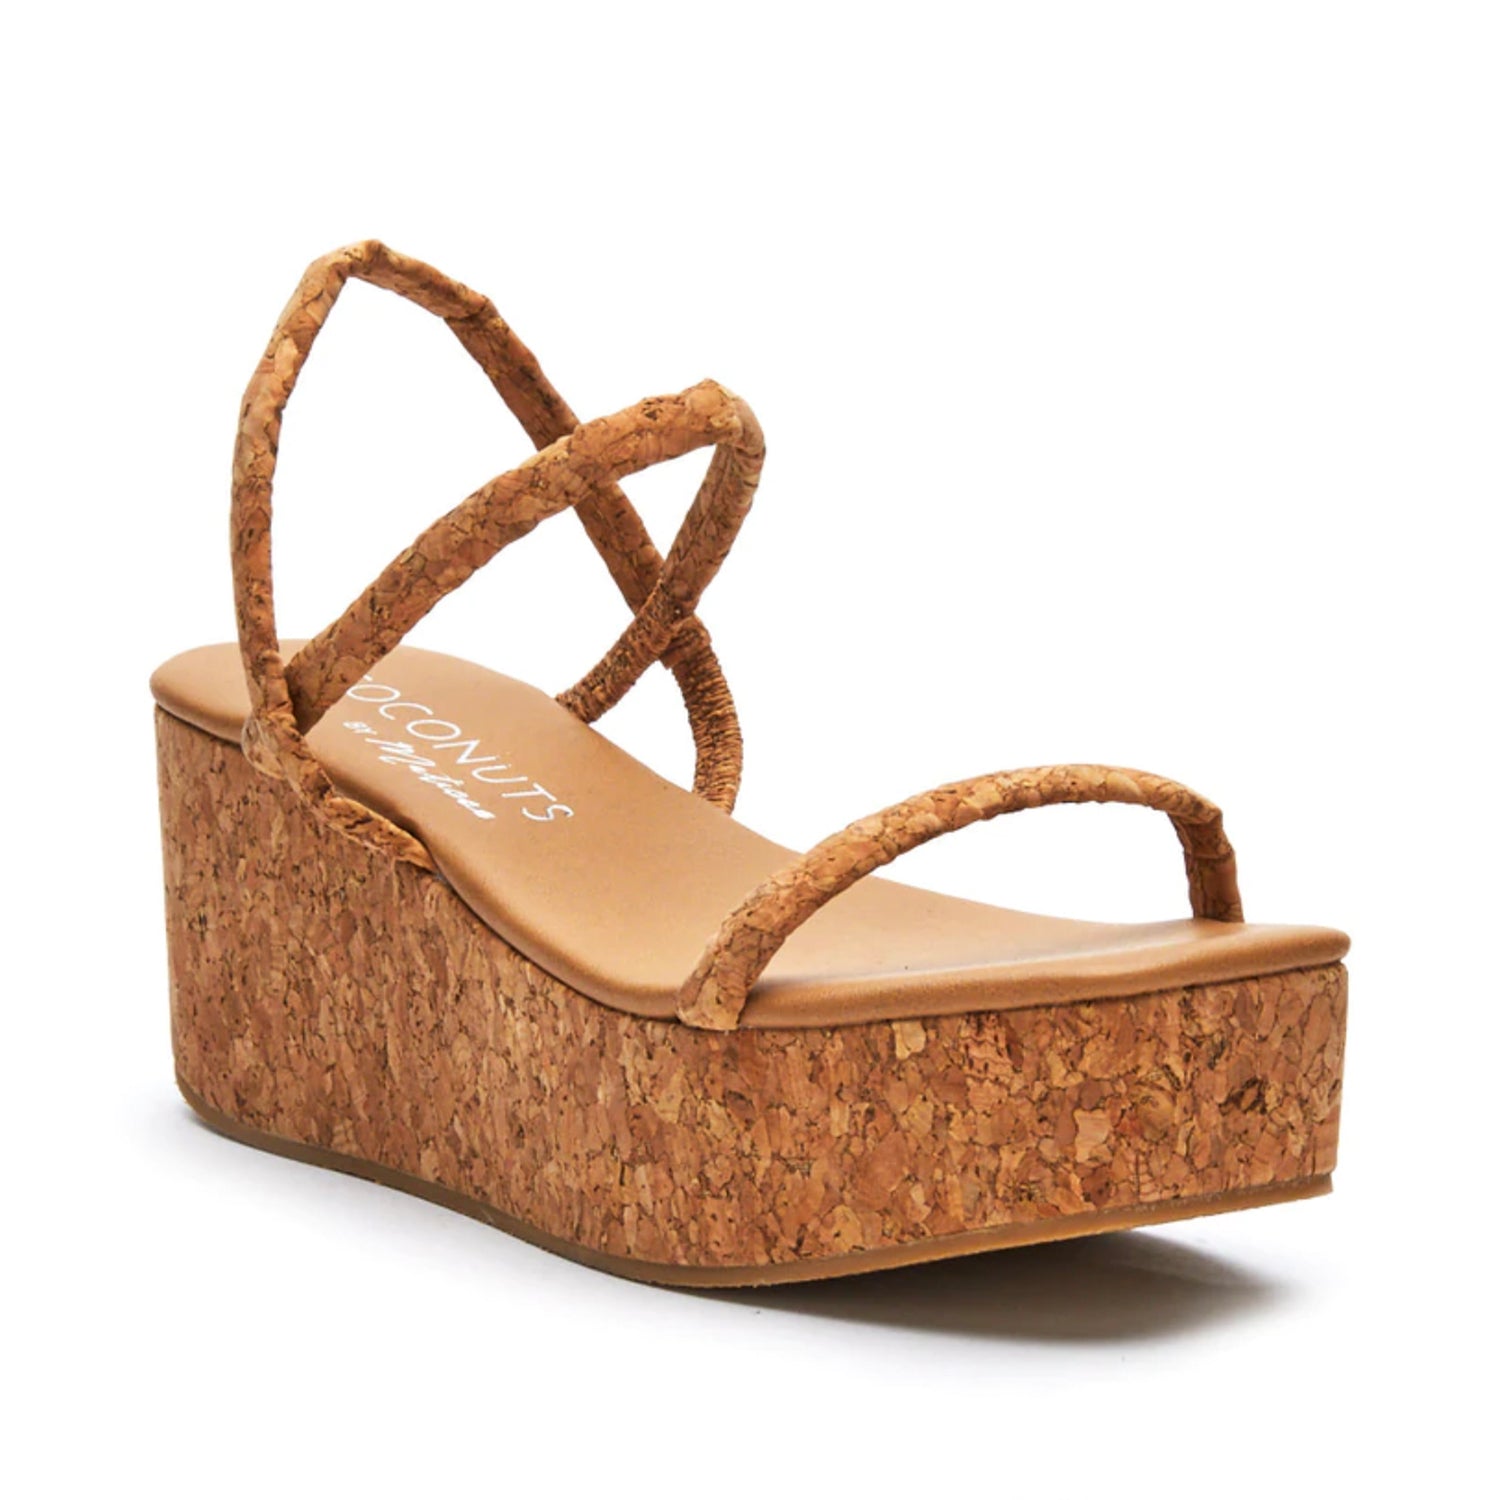 Honor Sandal. Delicate straps balance an extra-chunky platform in this super cute wedge sandal that brings glam down to earth